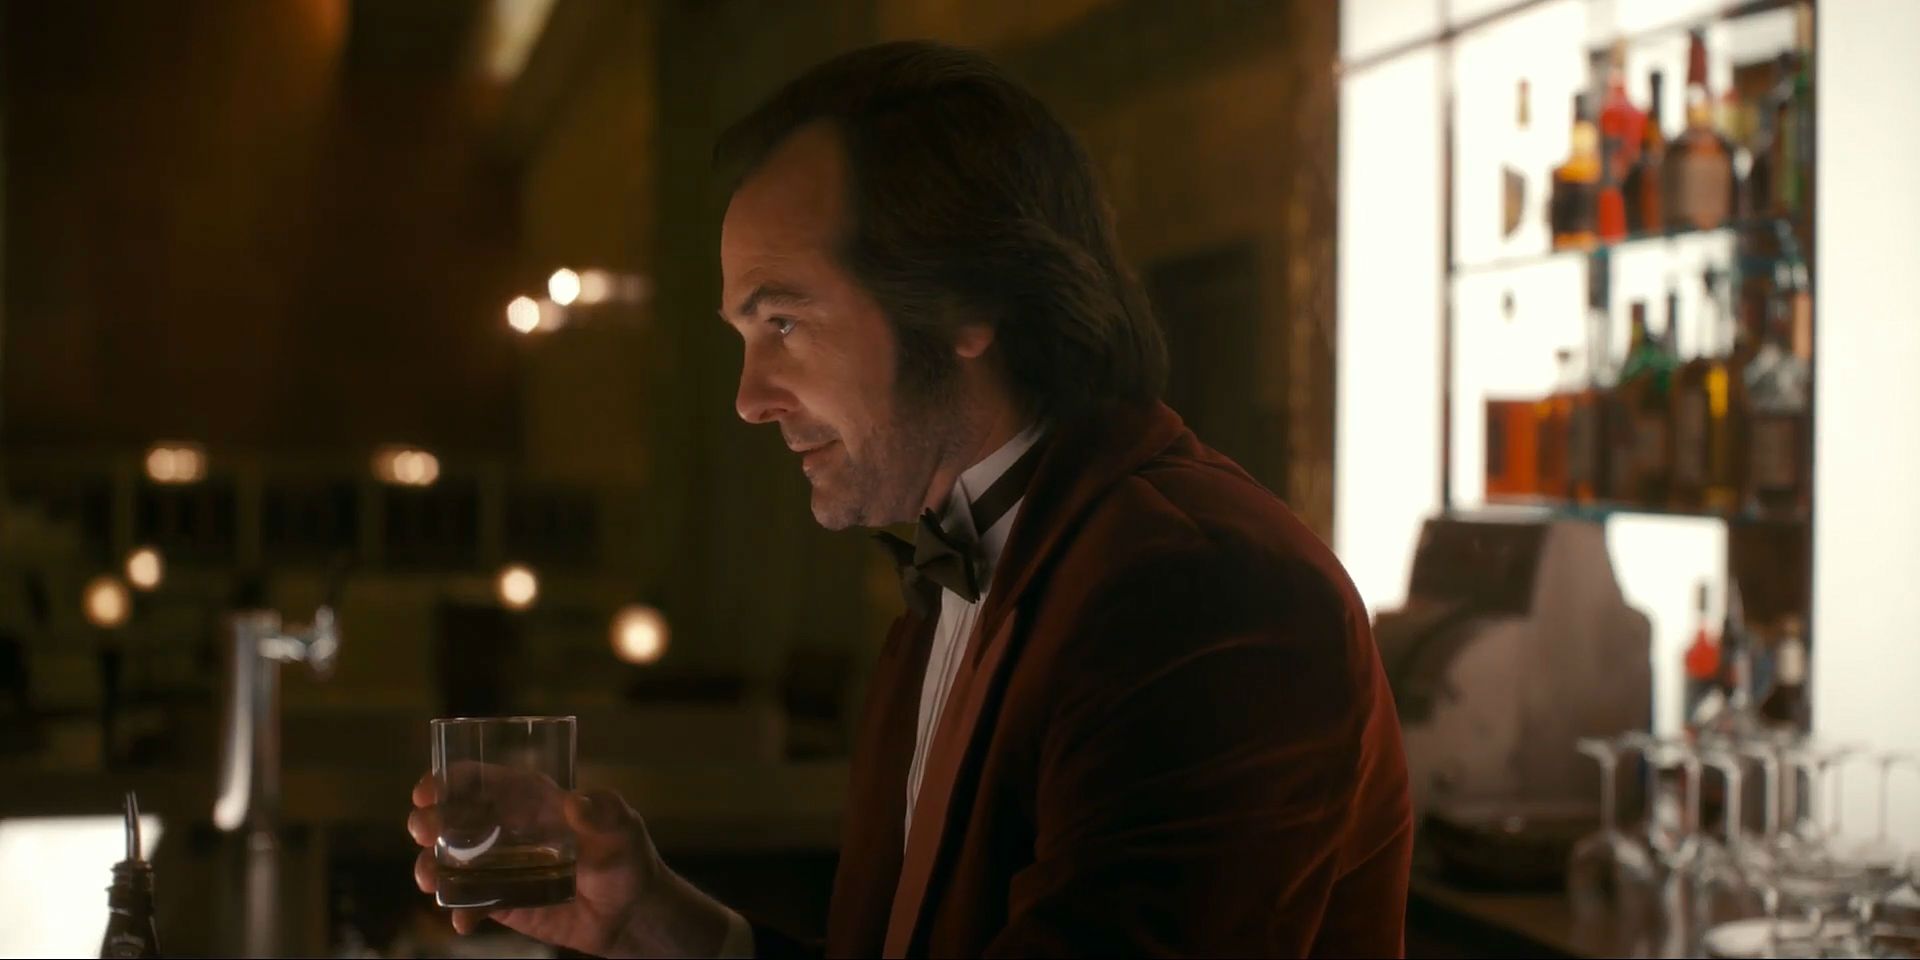 Doctor Sleep & The Shining Theory: Lloyd the Bartender Was Never a Real Person